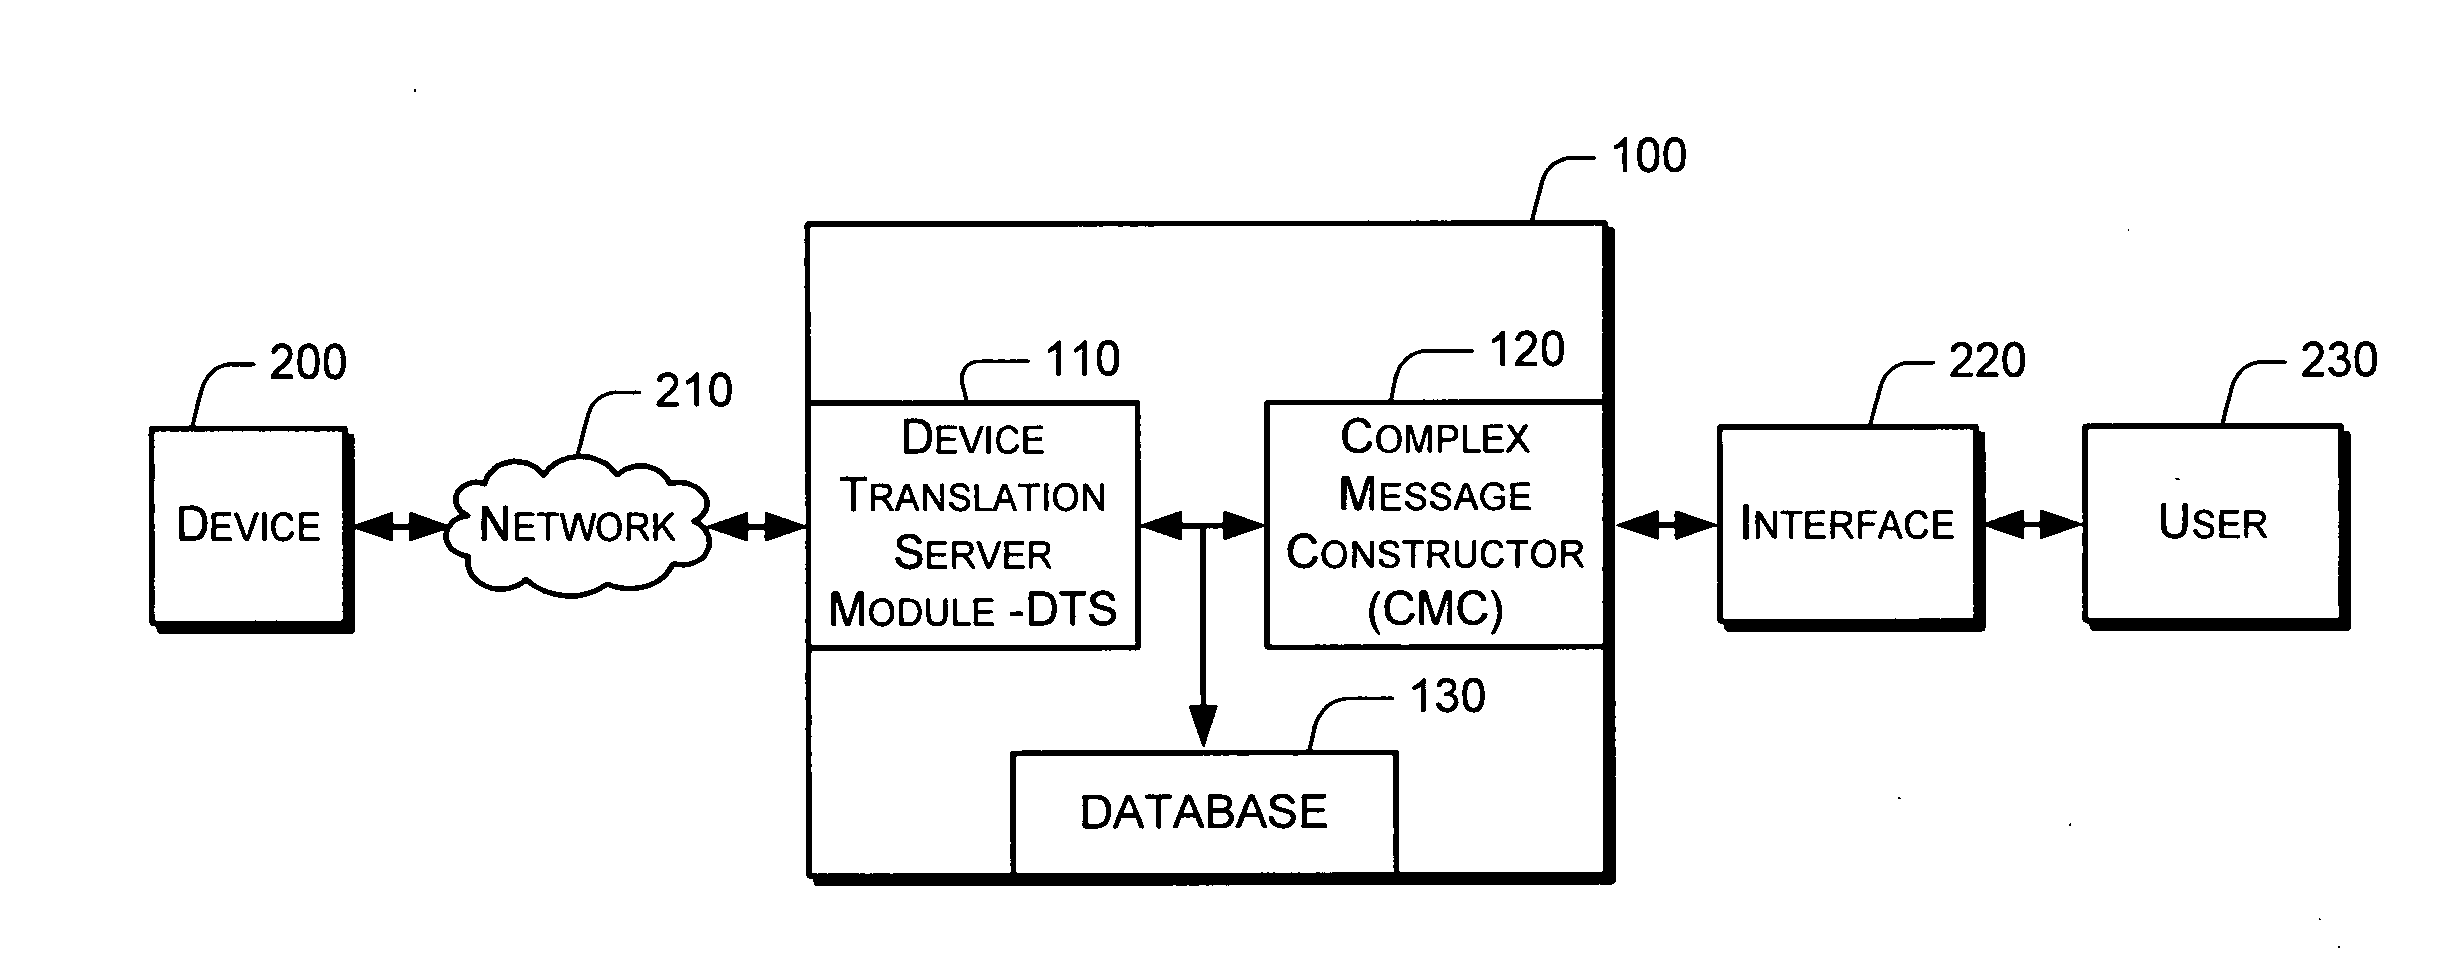 Methods for monitoring and control of electronic devices